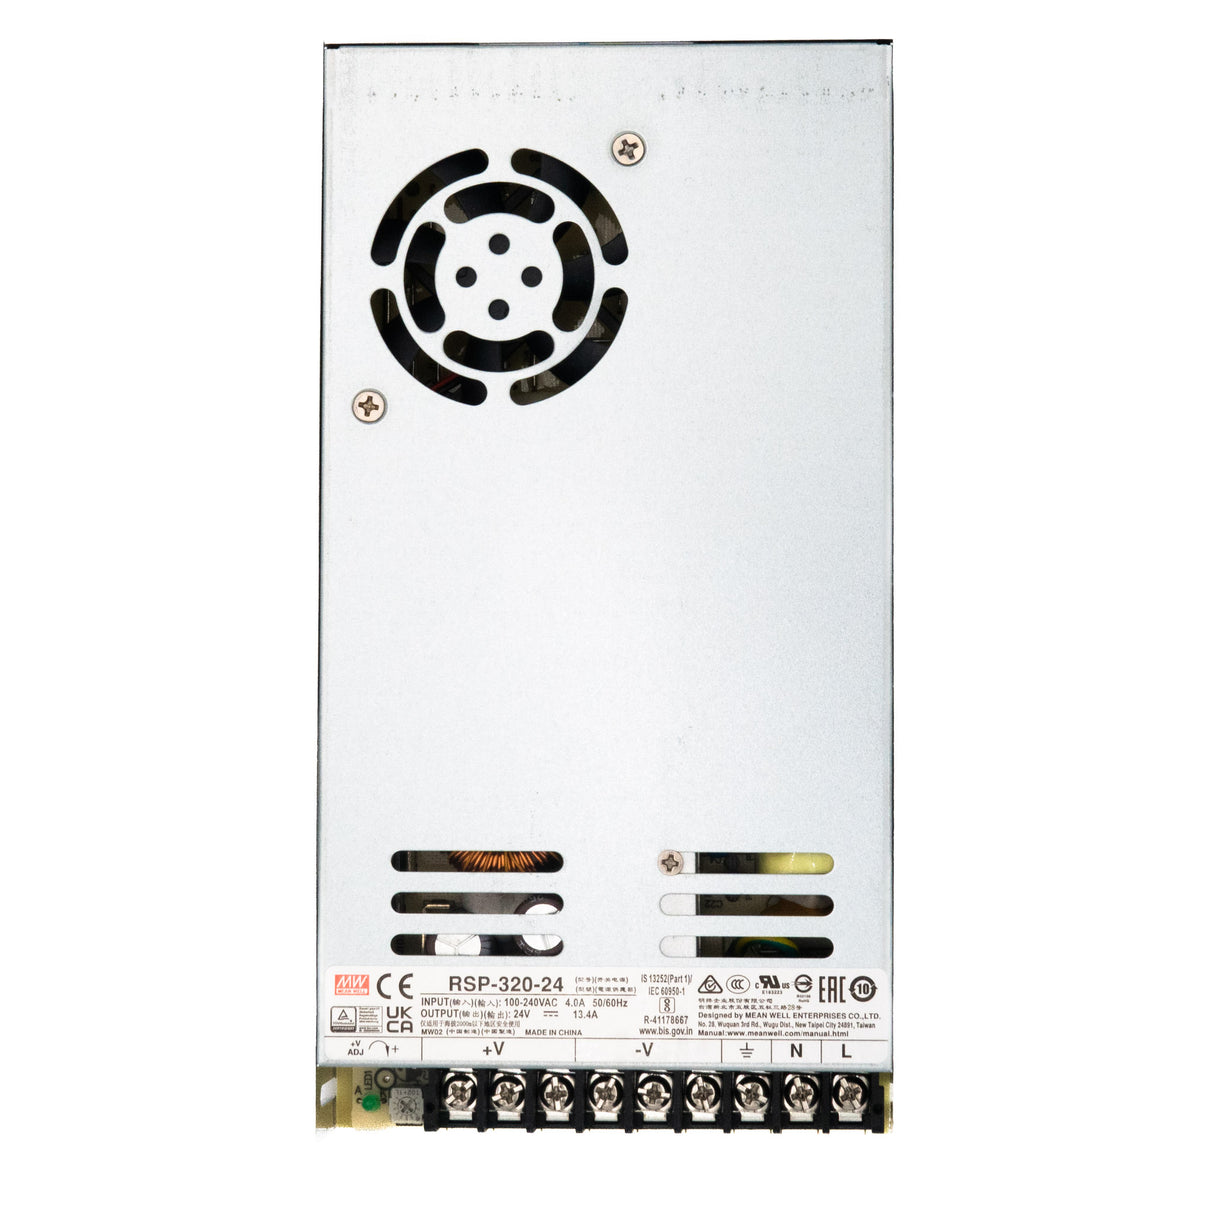 Mean Well RSP-320-24 Power Supply 320W 24V - PHOTO 3